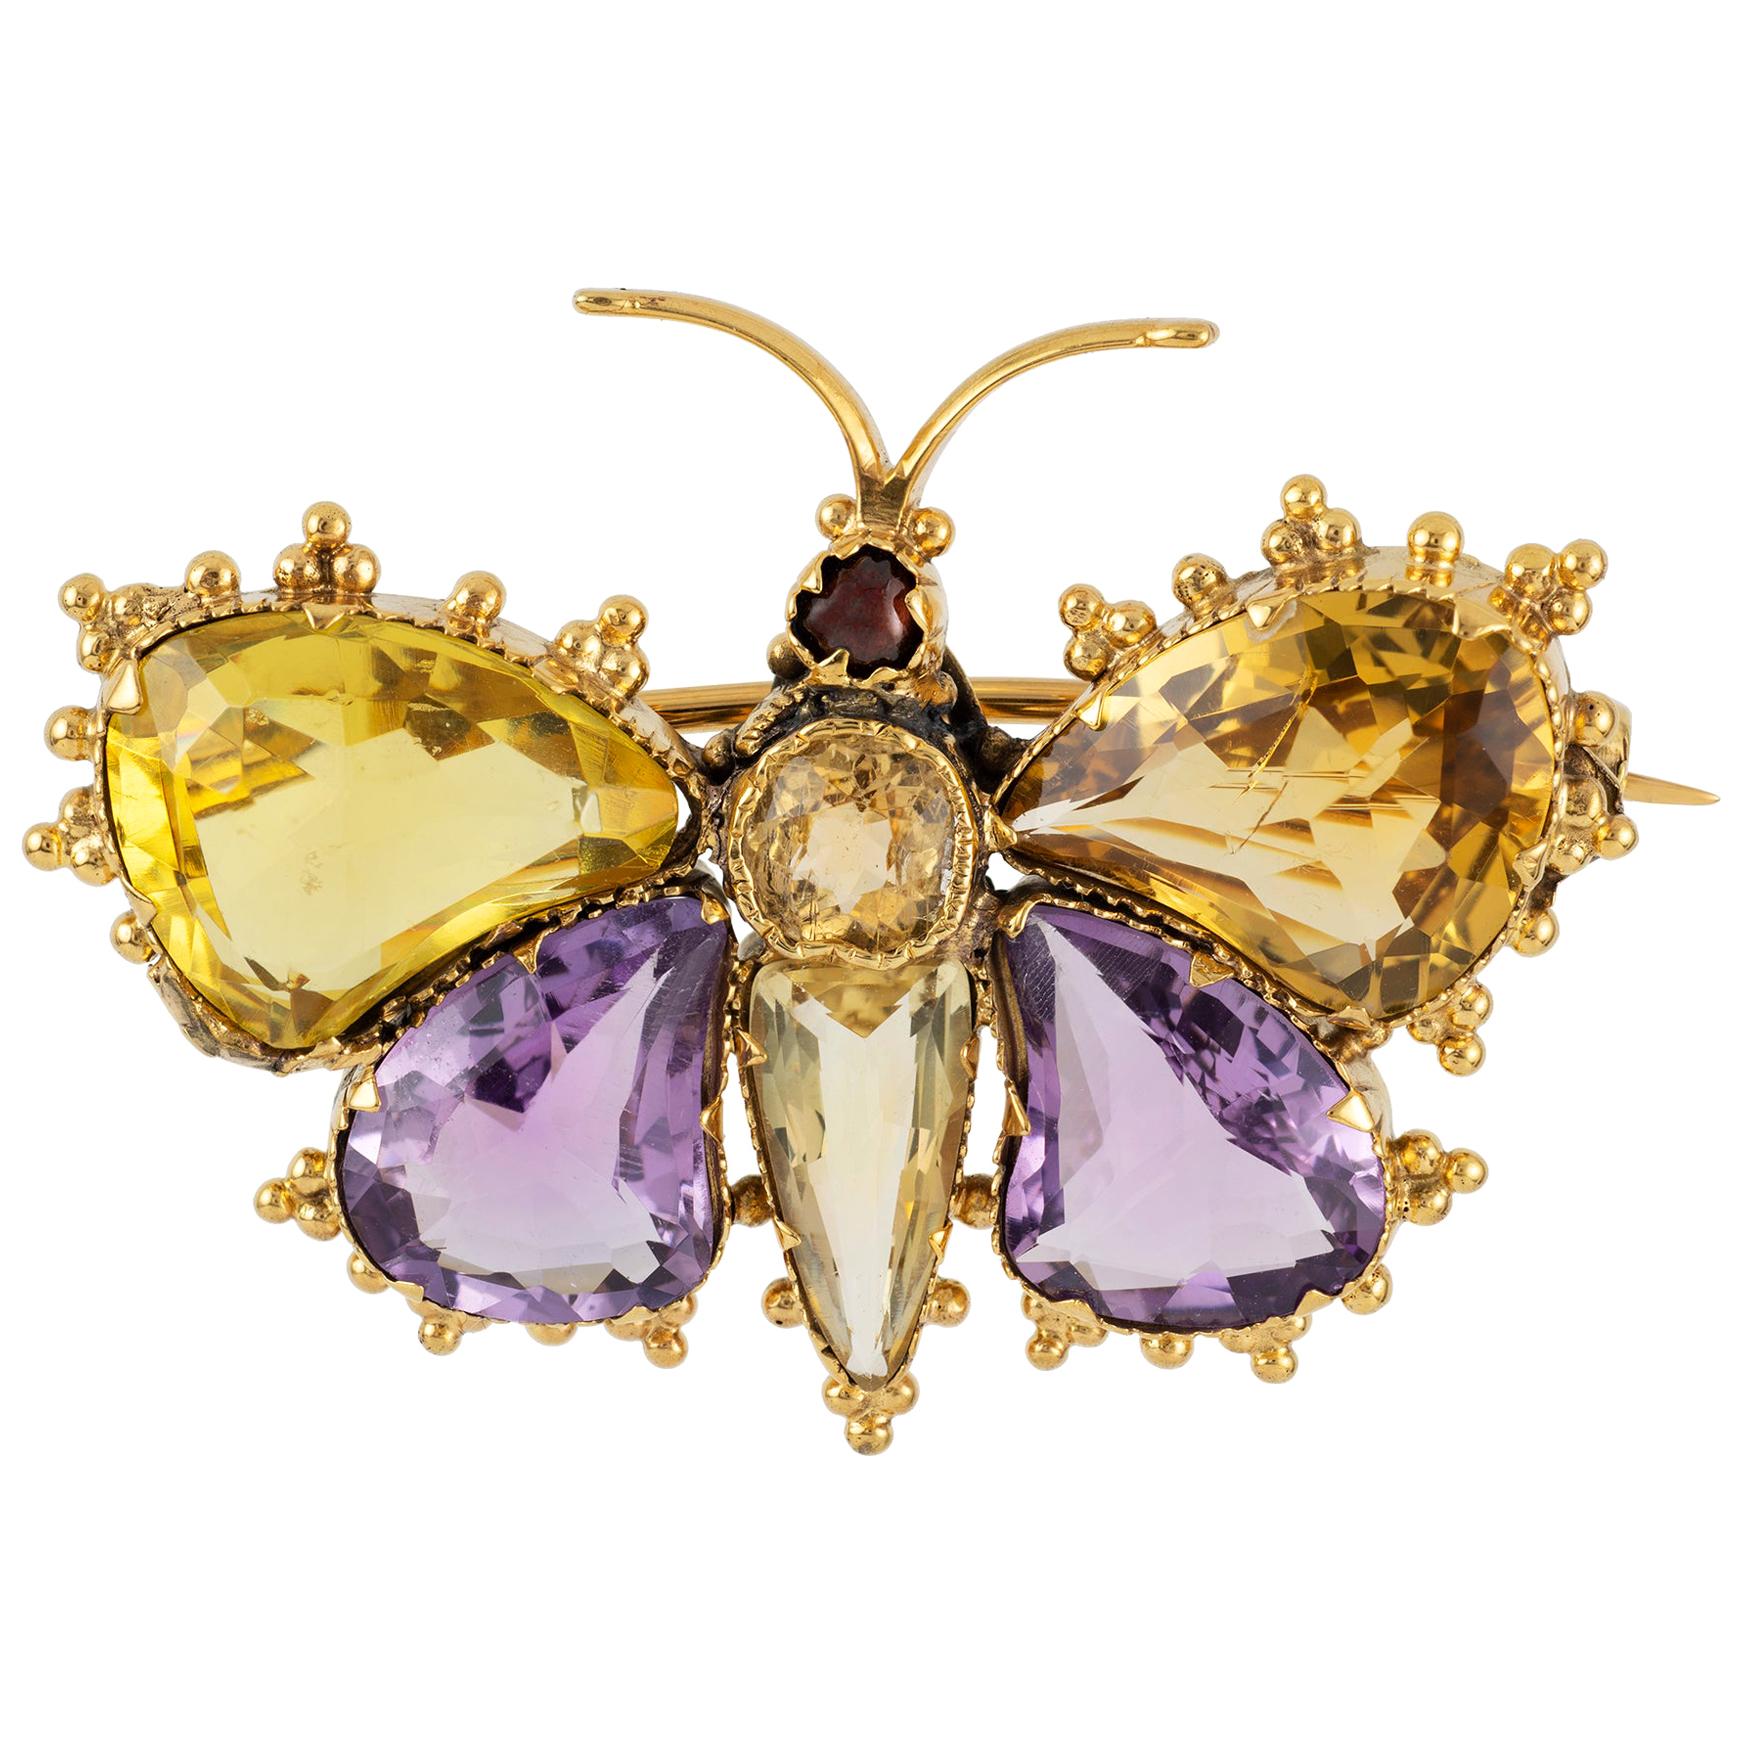 Regency Yellow Gold and Gemset Butterfly Brooch